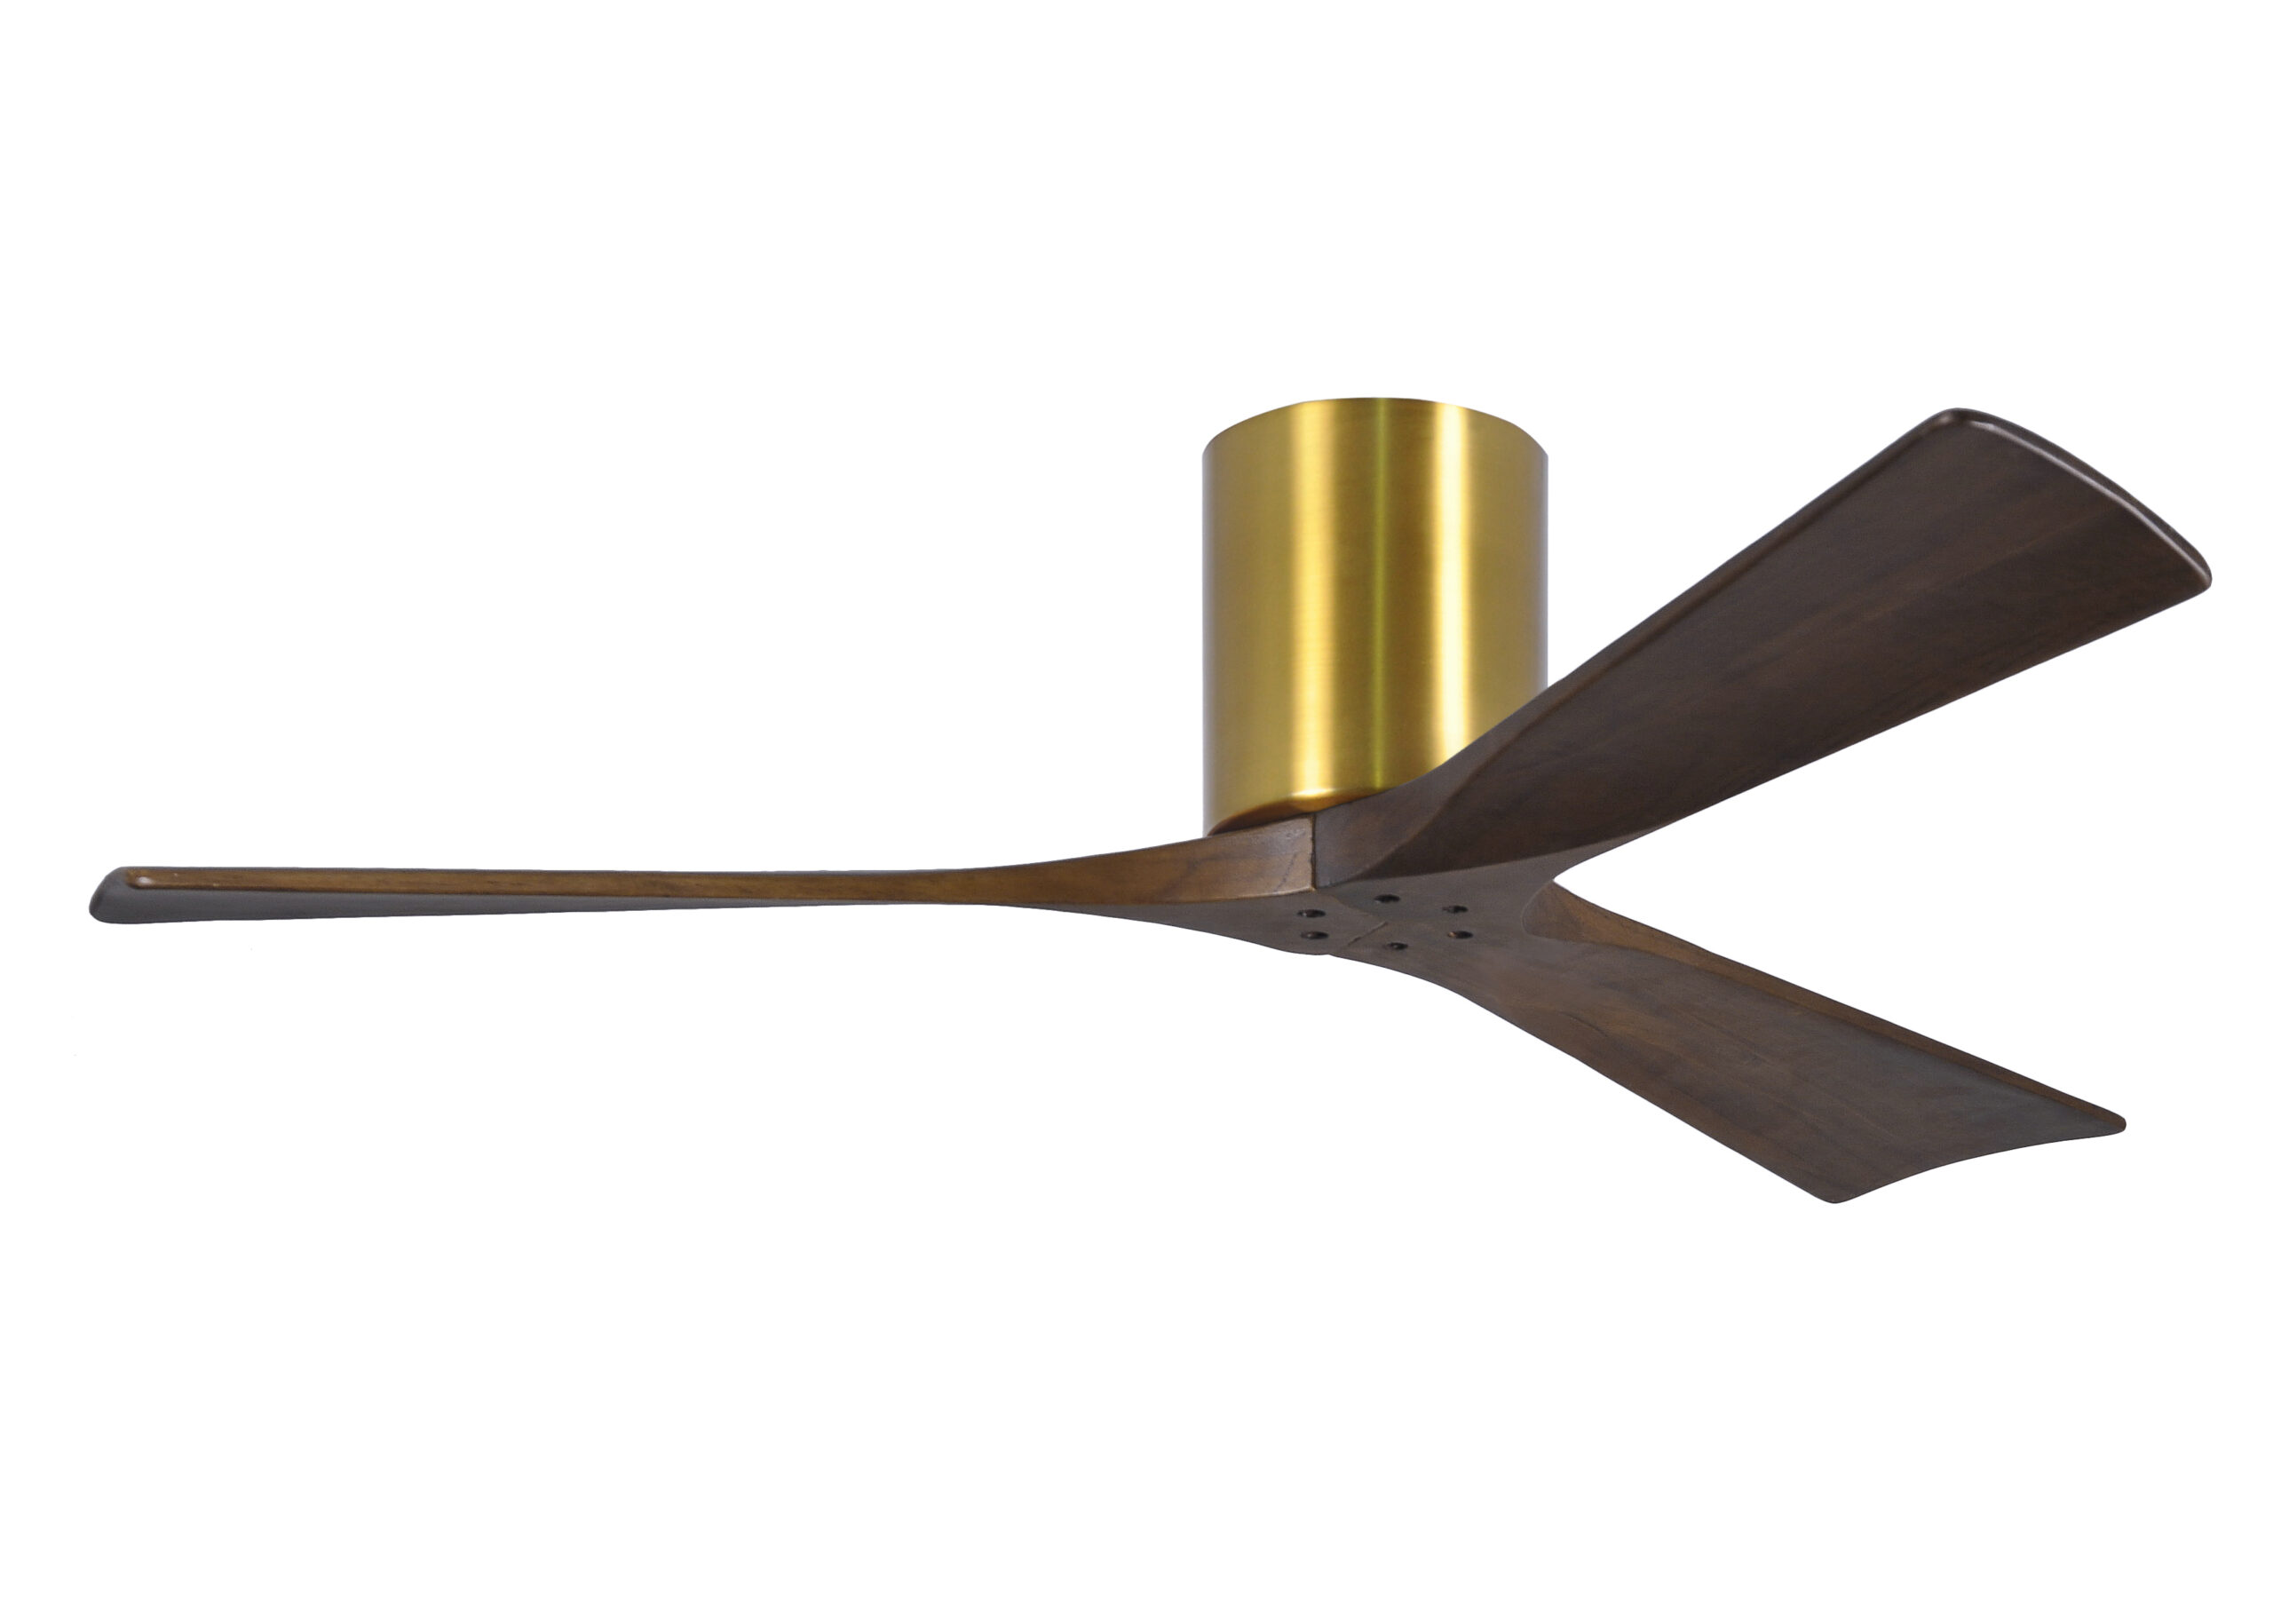 Irene-3H ceiling fan in Brushed Brass finish with 52